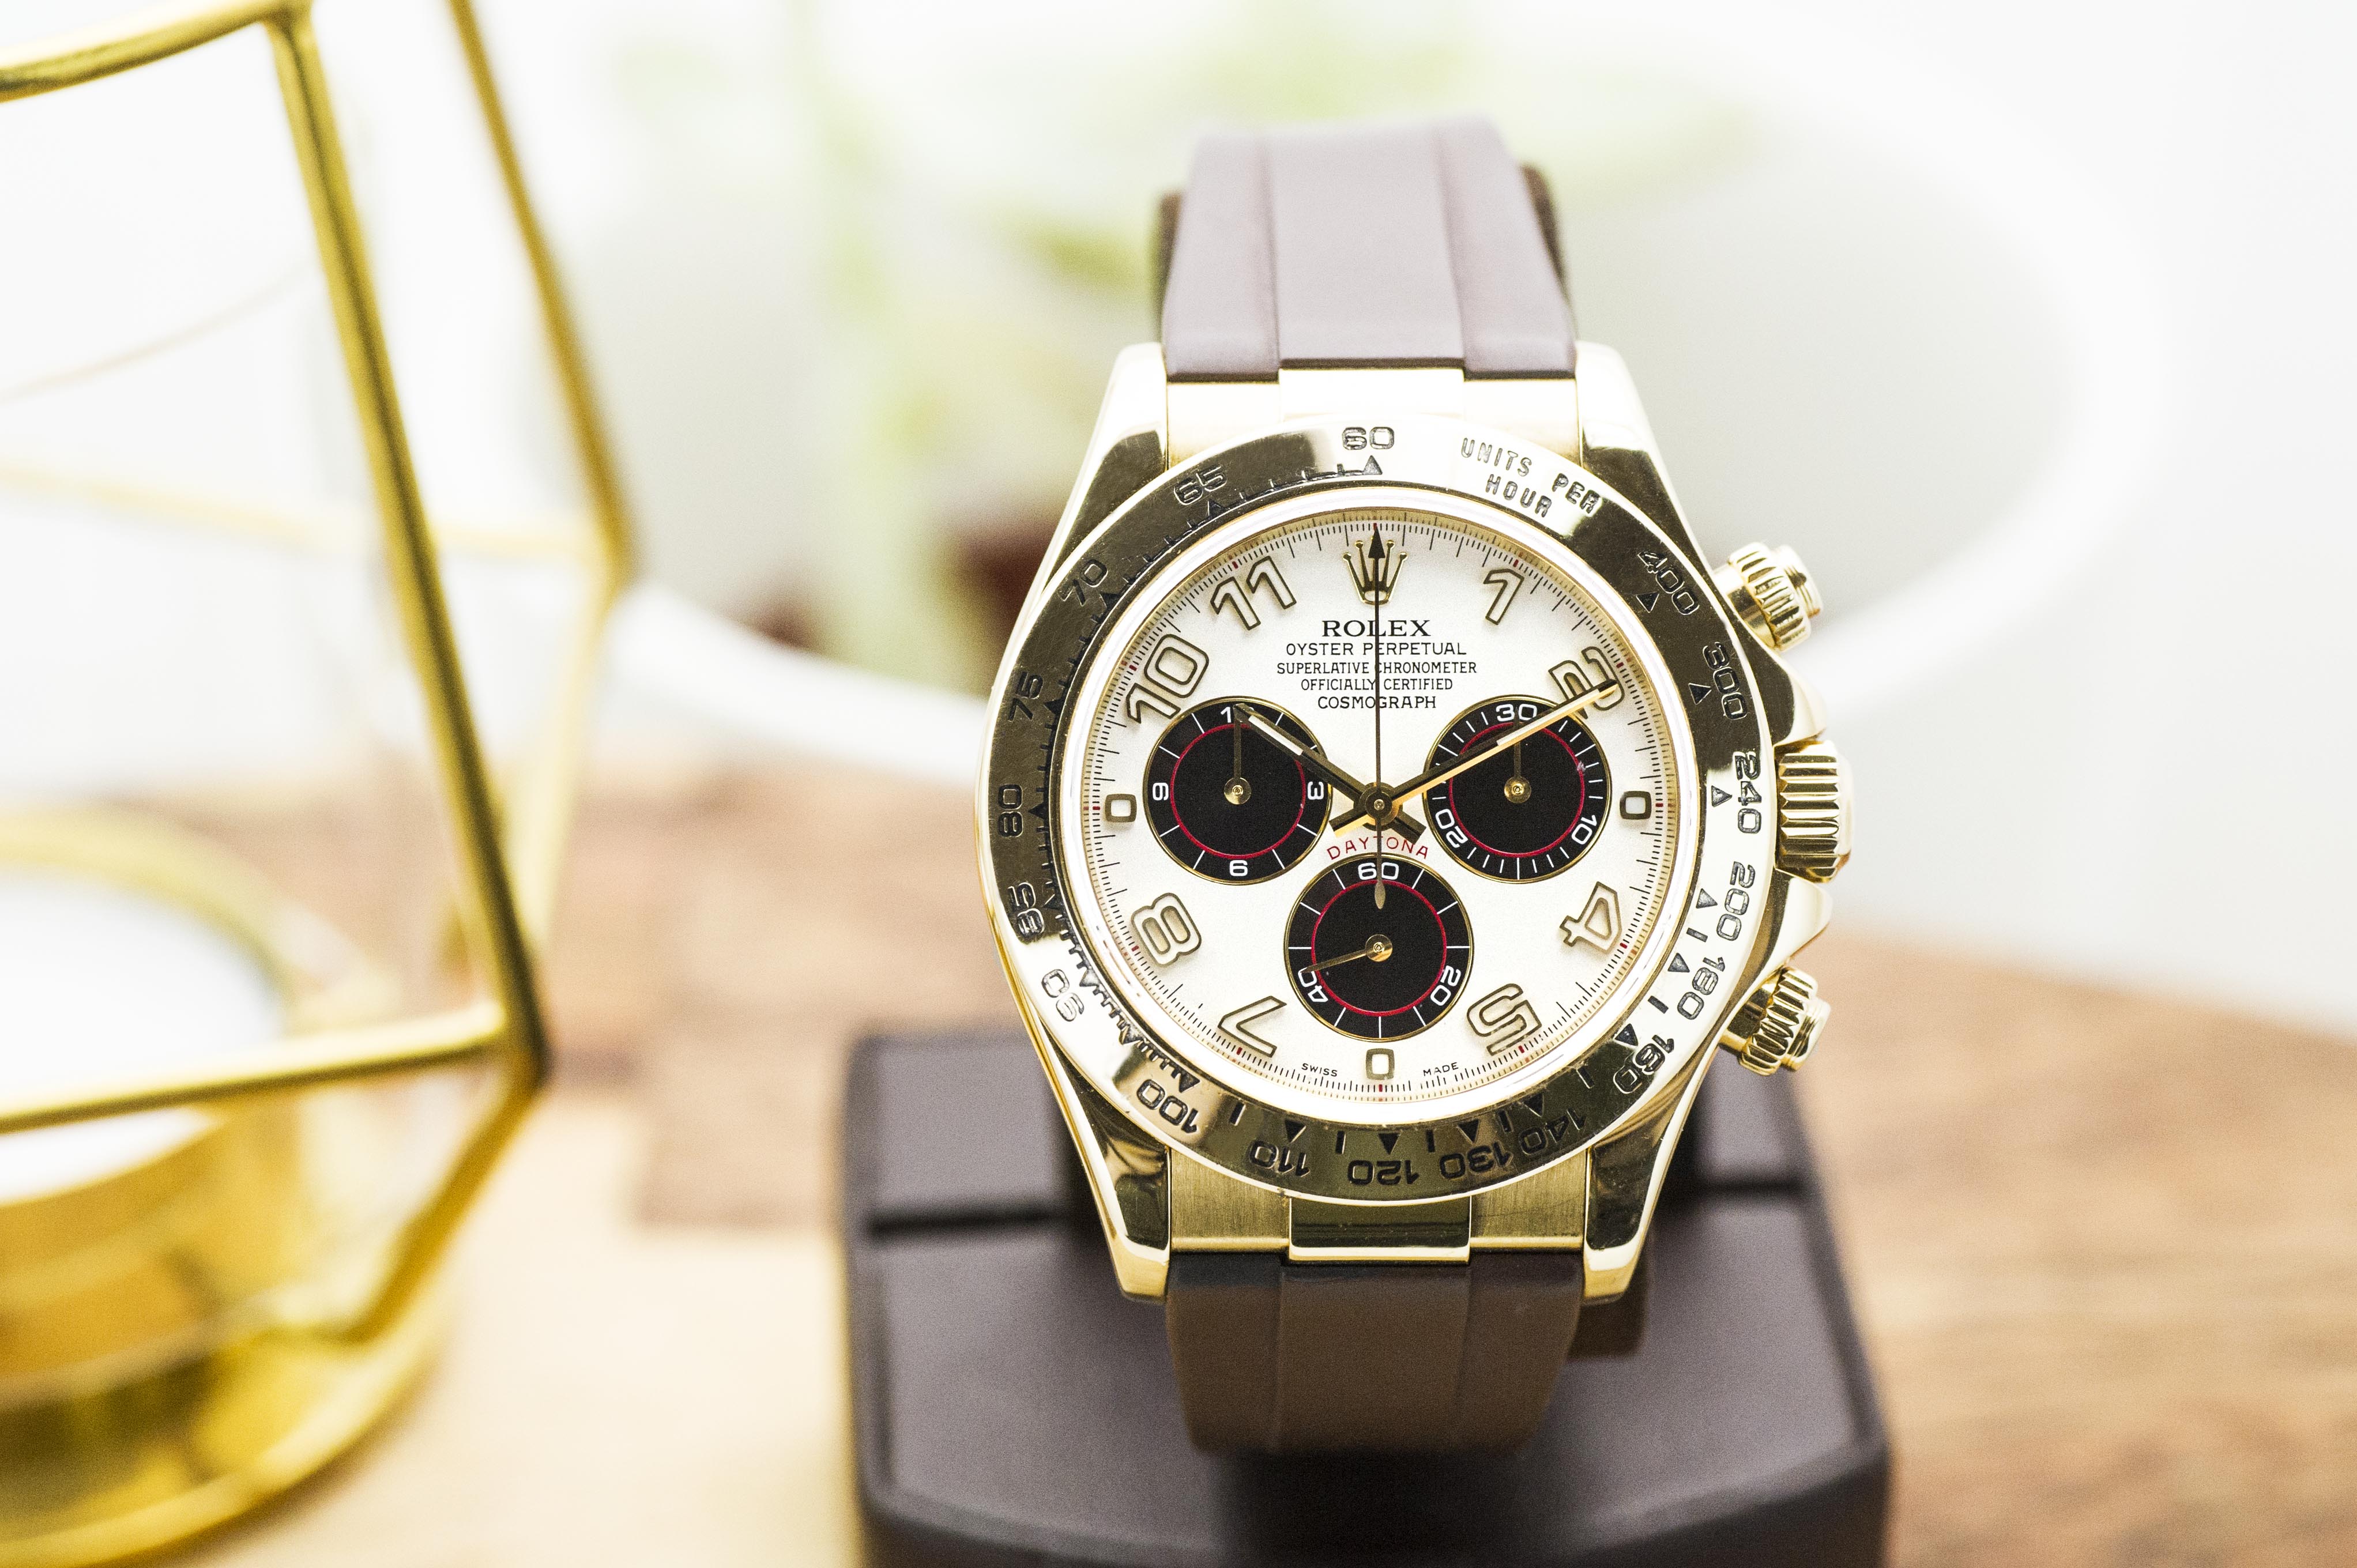 Pre-owned men’s Rolex Daytona in yellow gold with a brown leather strap.